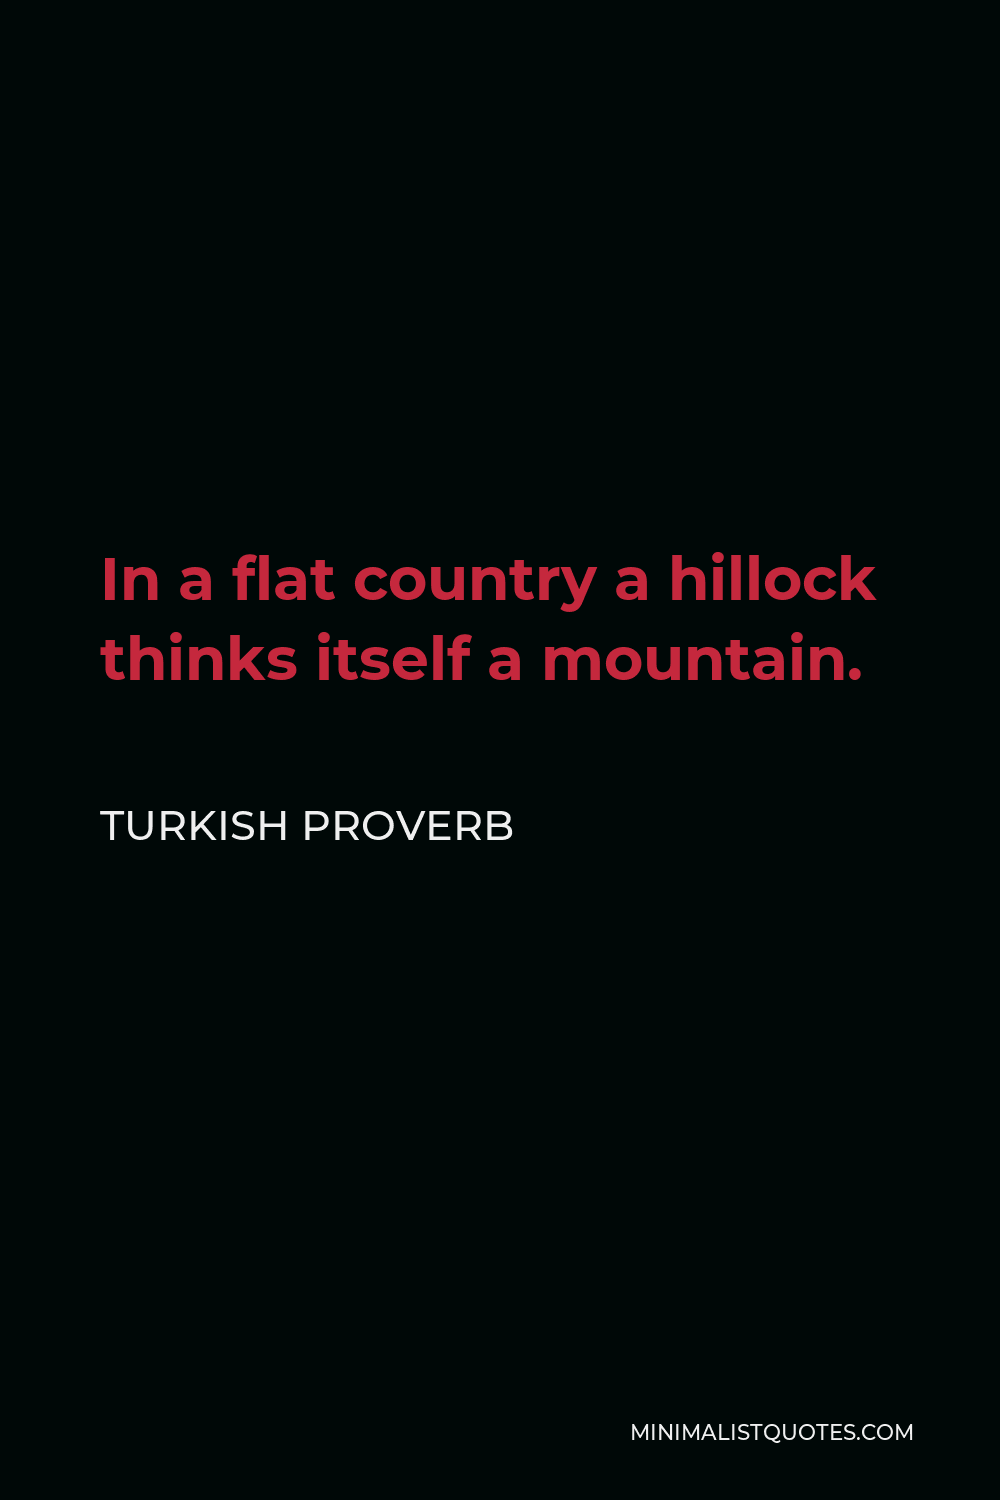 Turkish Proverb Quote - In a flat country a hillock thinks itself a mountain.